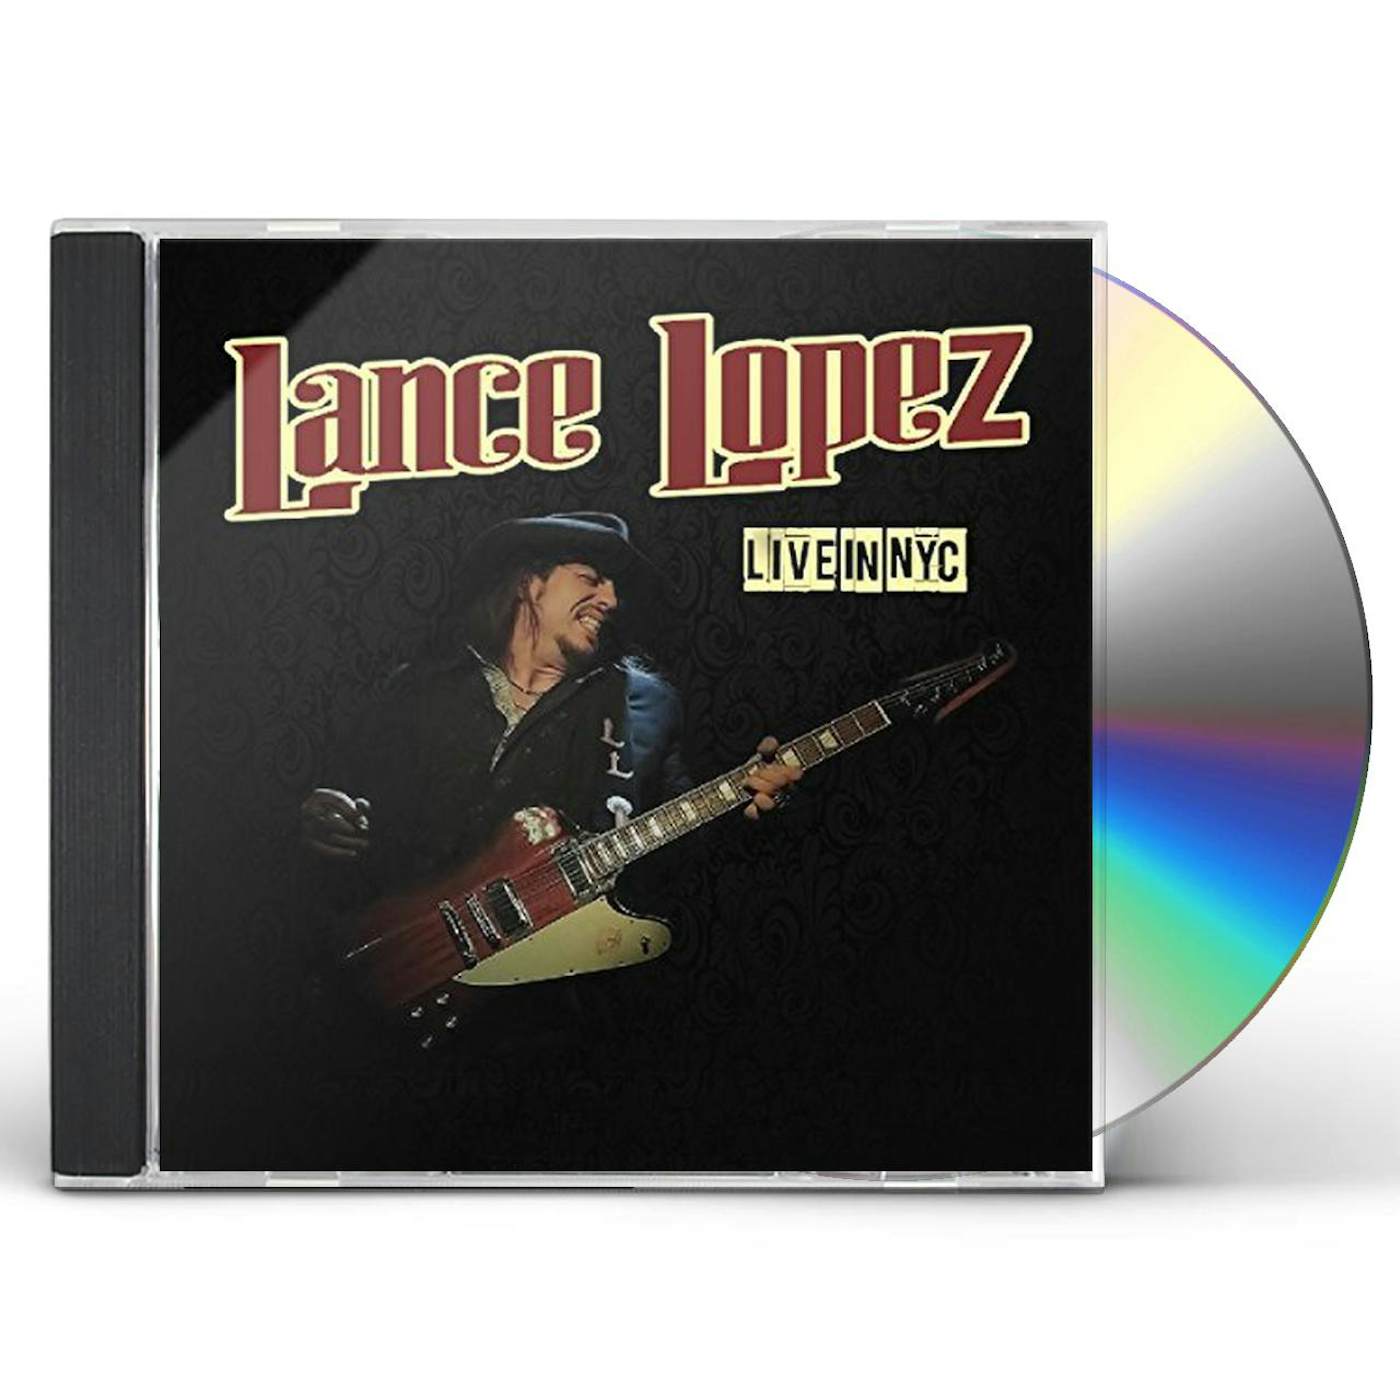 Lance Lopez LIVE IN NYC CD